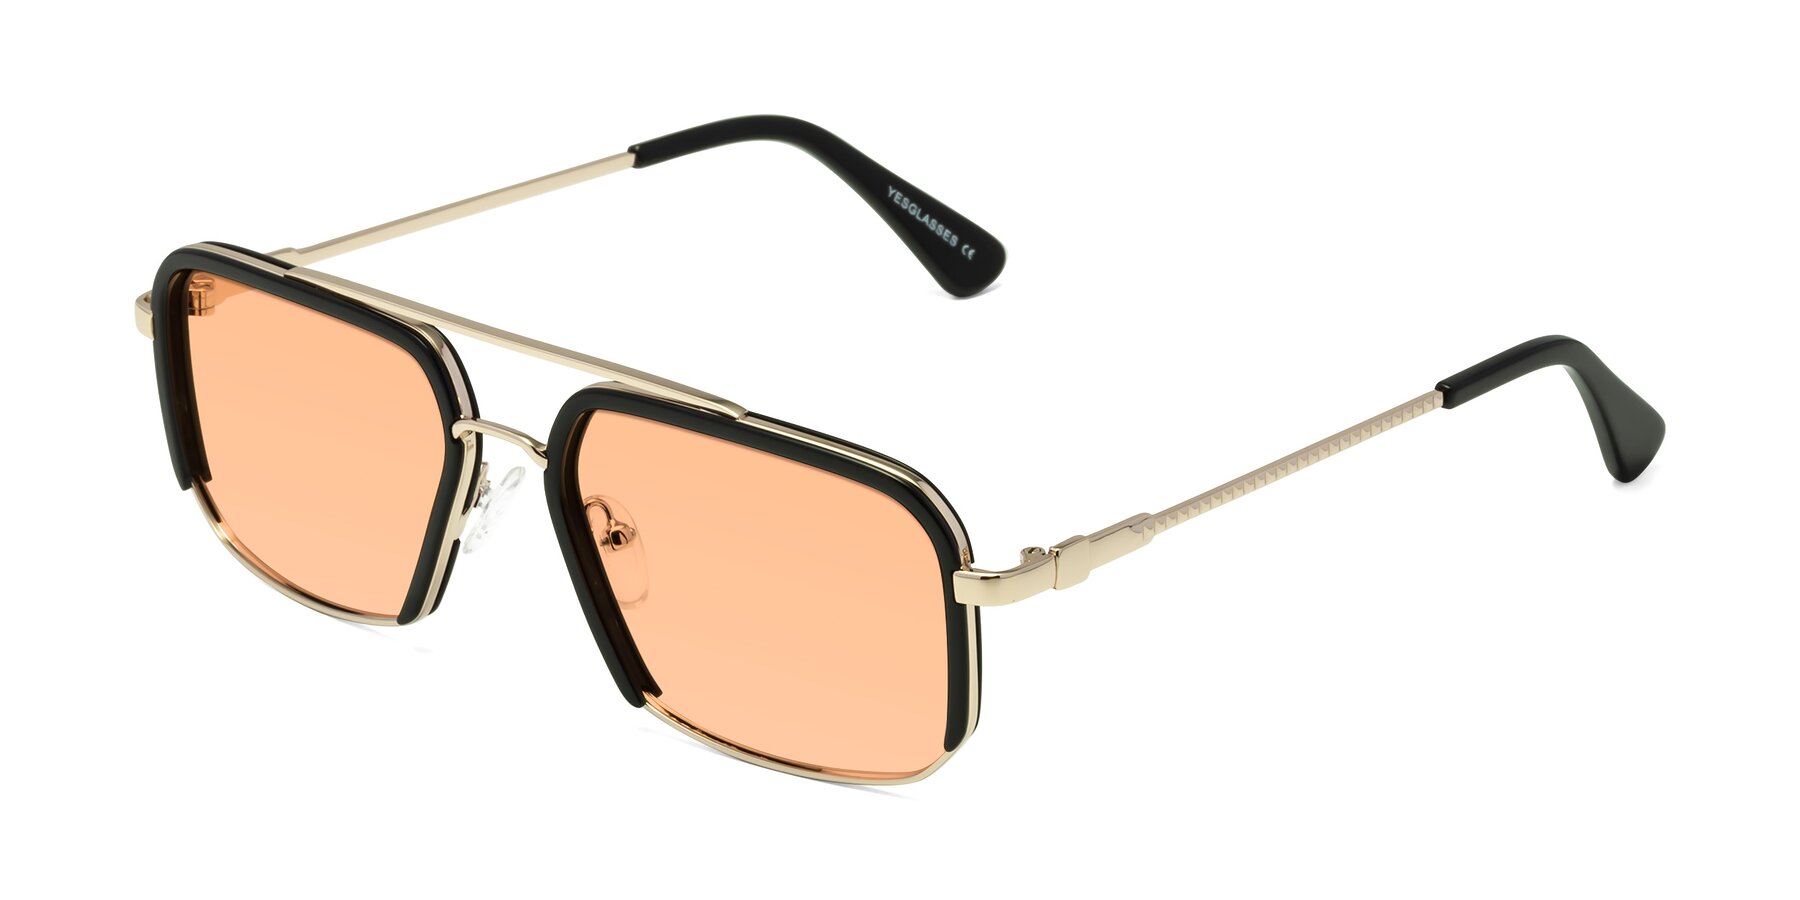 Angle of Dechter in Black-Gold with Light Orange Tinted Lenses